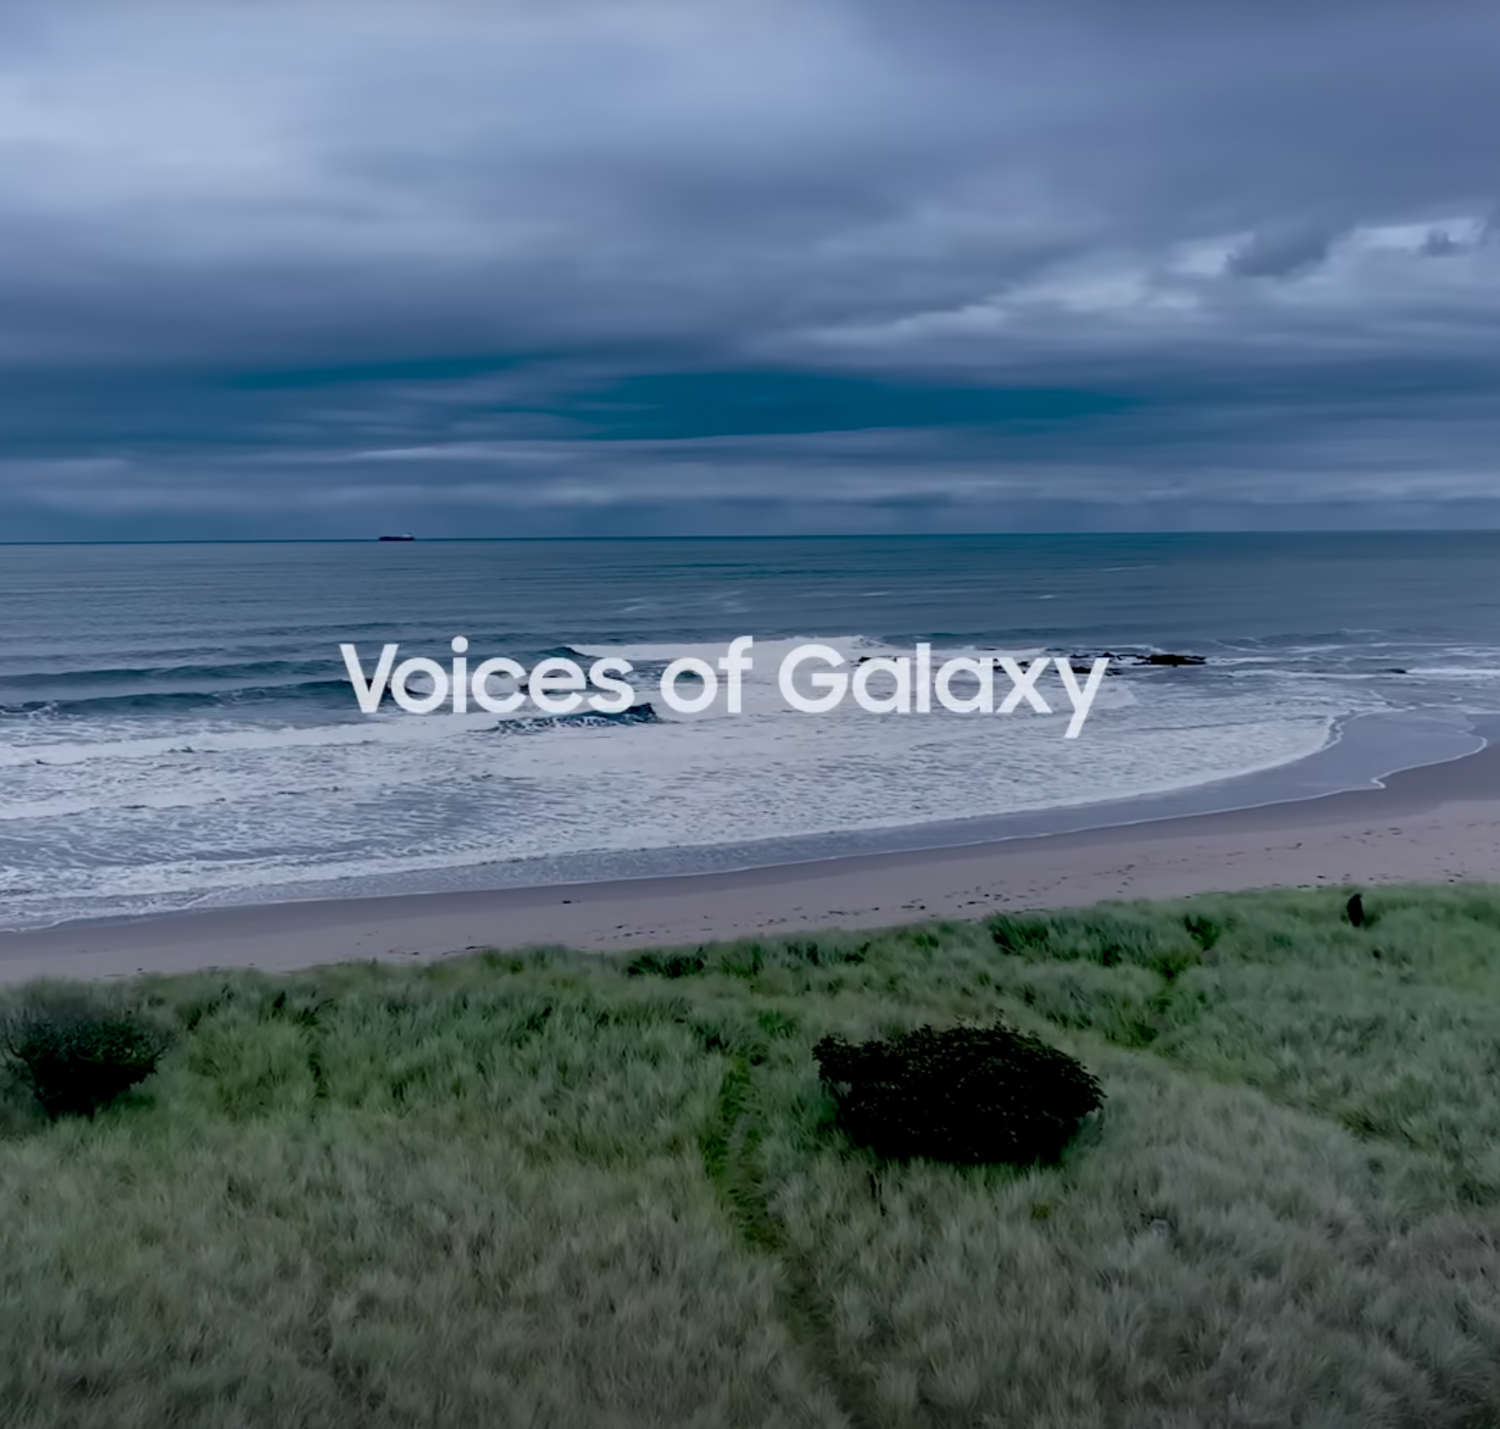 Ocean Plastic Pots featured in the Samsung - Voices of Galaxy Series.